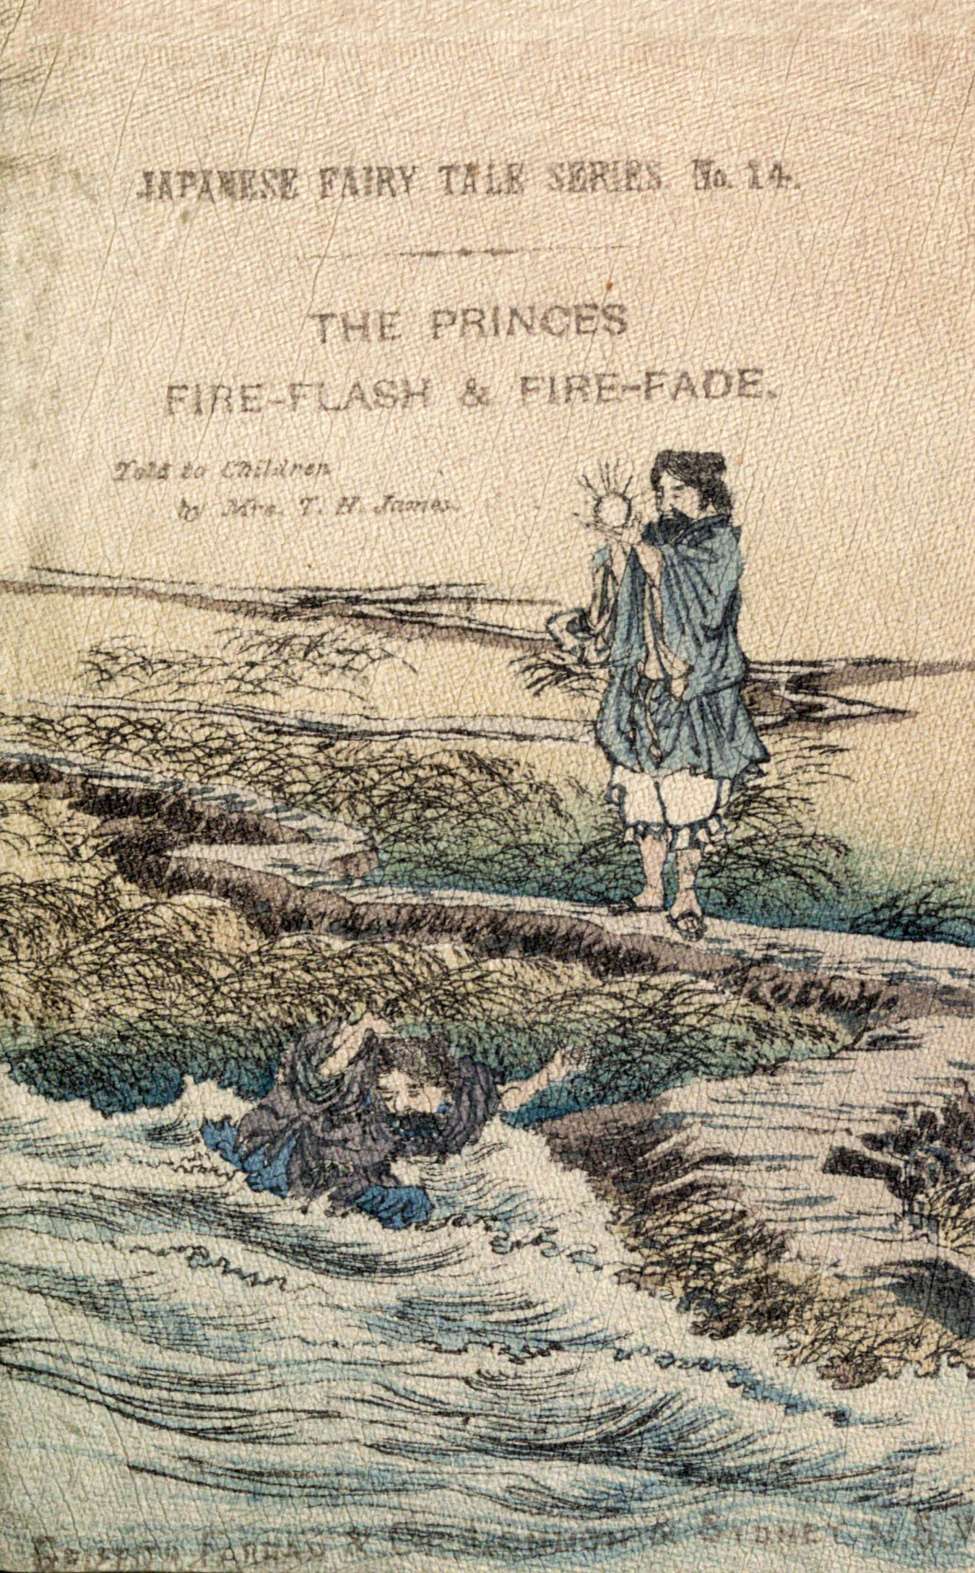 Book Cover For Japanese Fairy Tale Series 14 - Princes Fire-Flash & Fire-Fade